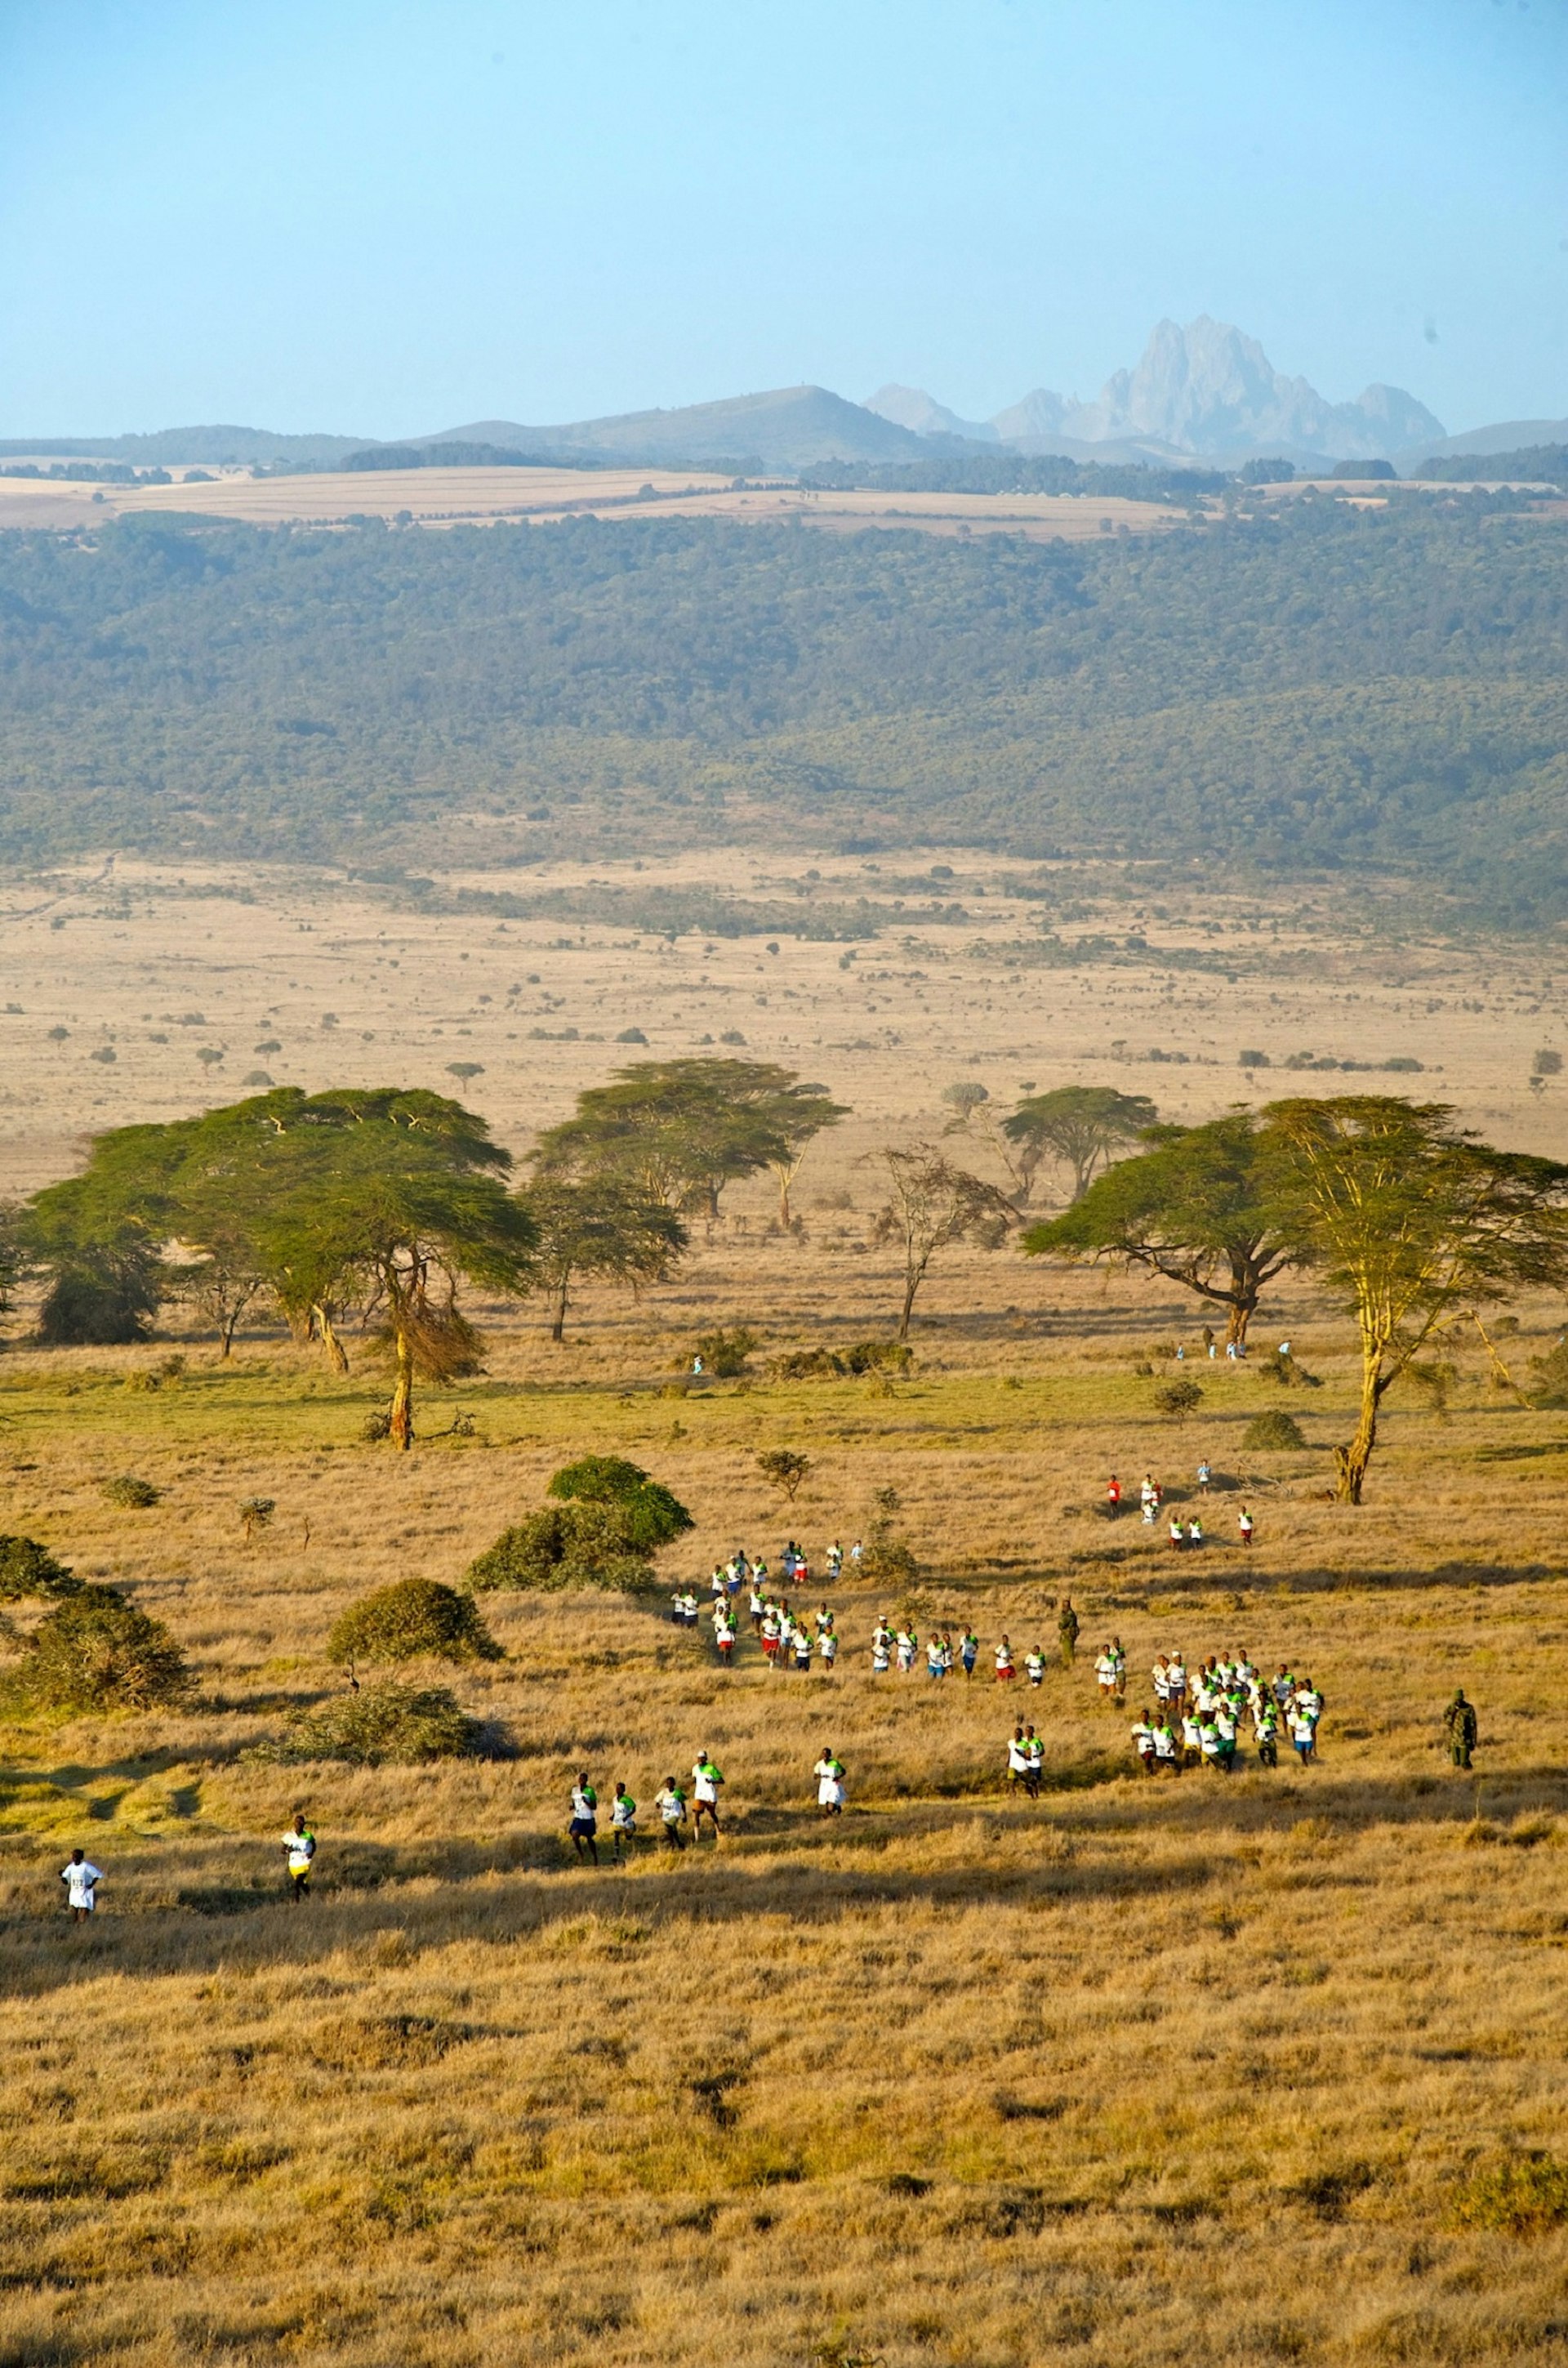 A line of runners snakes its way between acacia trees on the grassy Laikipia Plateau, with the rocky summit of Mt Kenya in the distance.